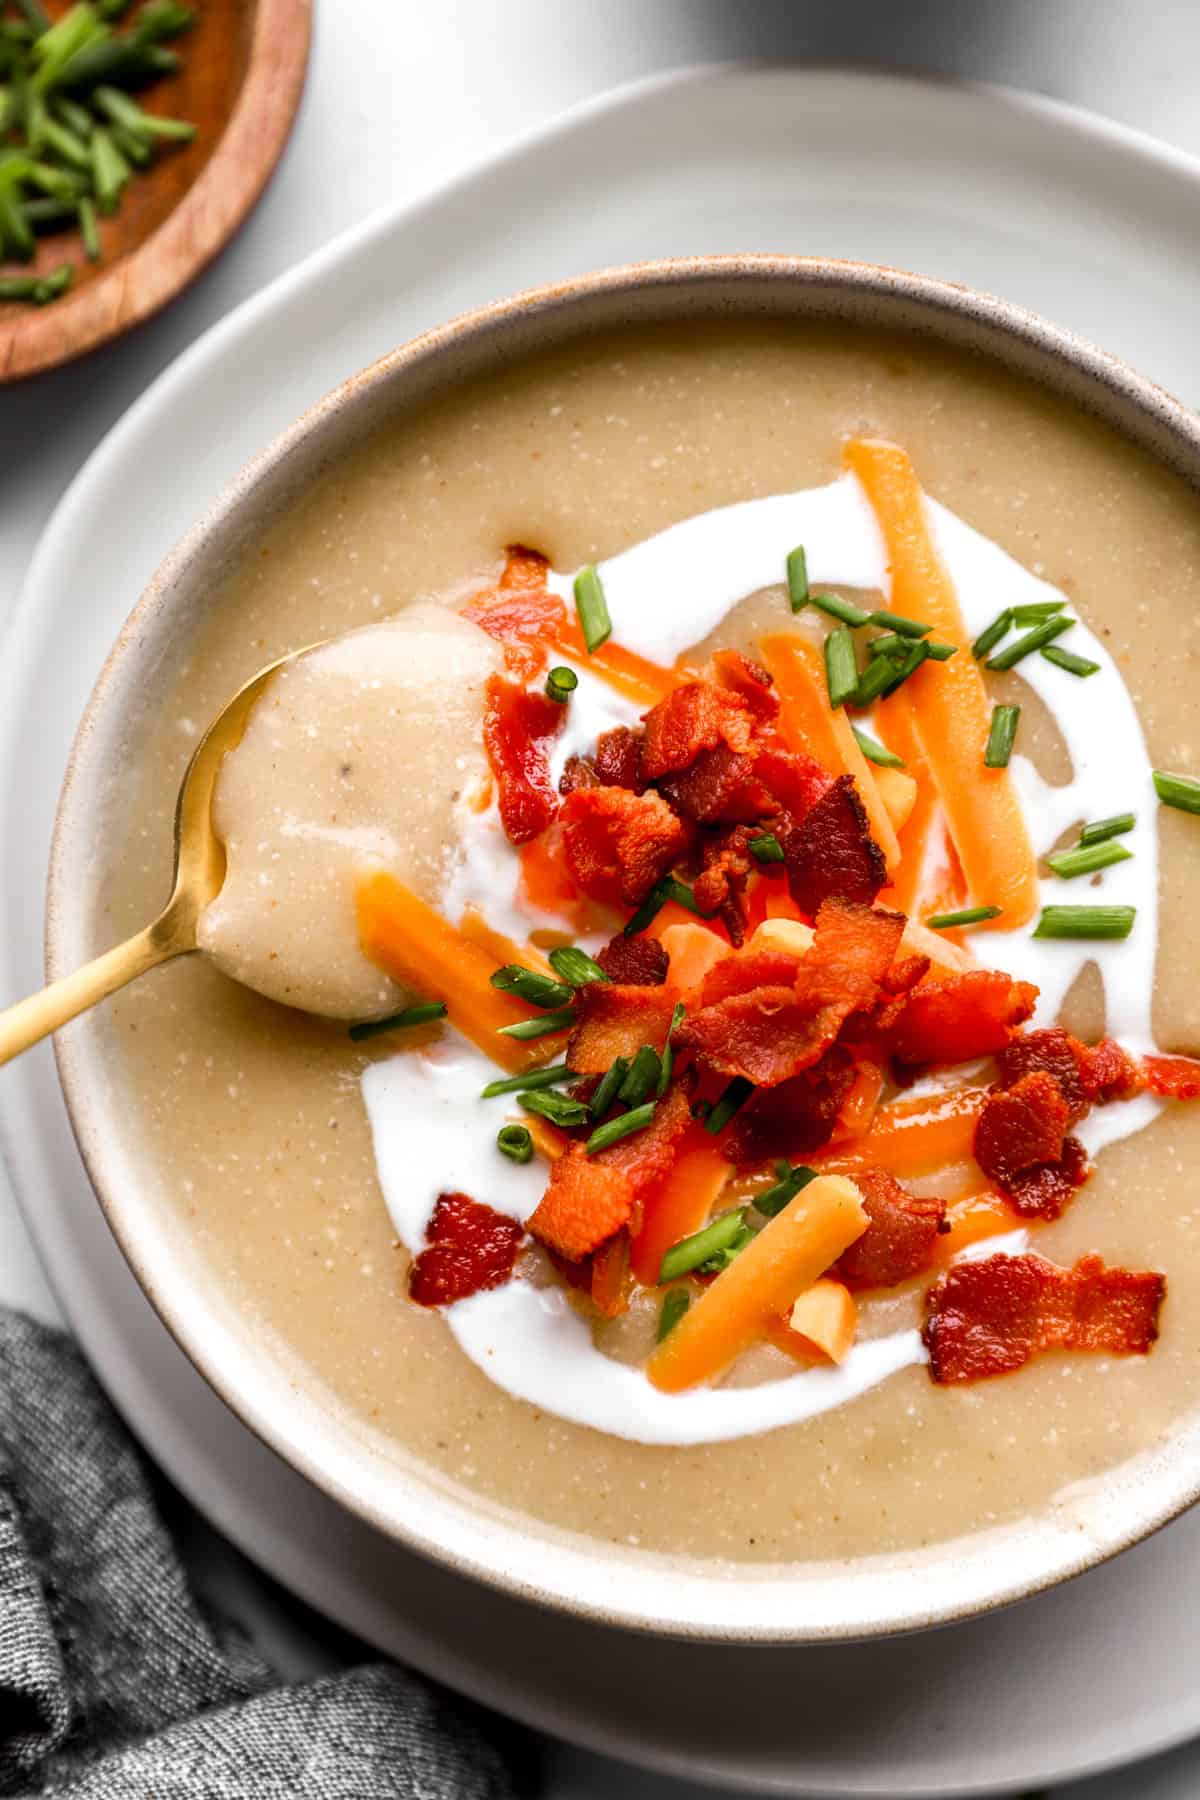 Pictured above is a bowl of soup filled with potatoes and topped with bacon, cheese, sour cream and chives.